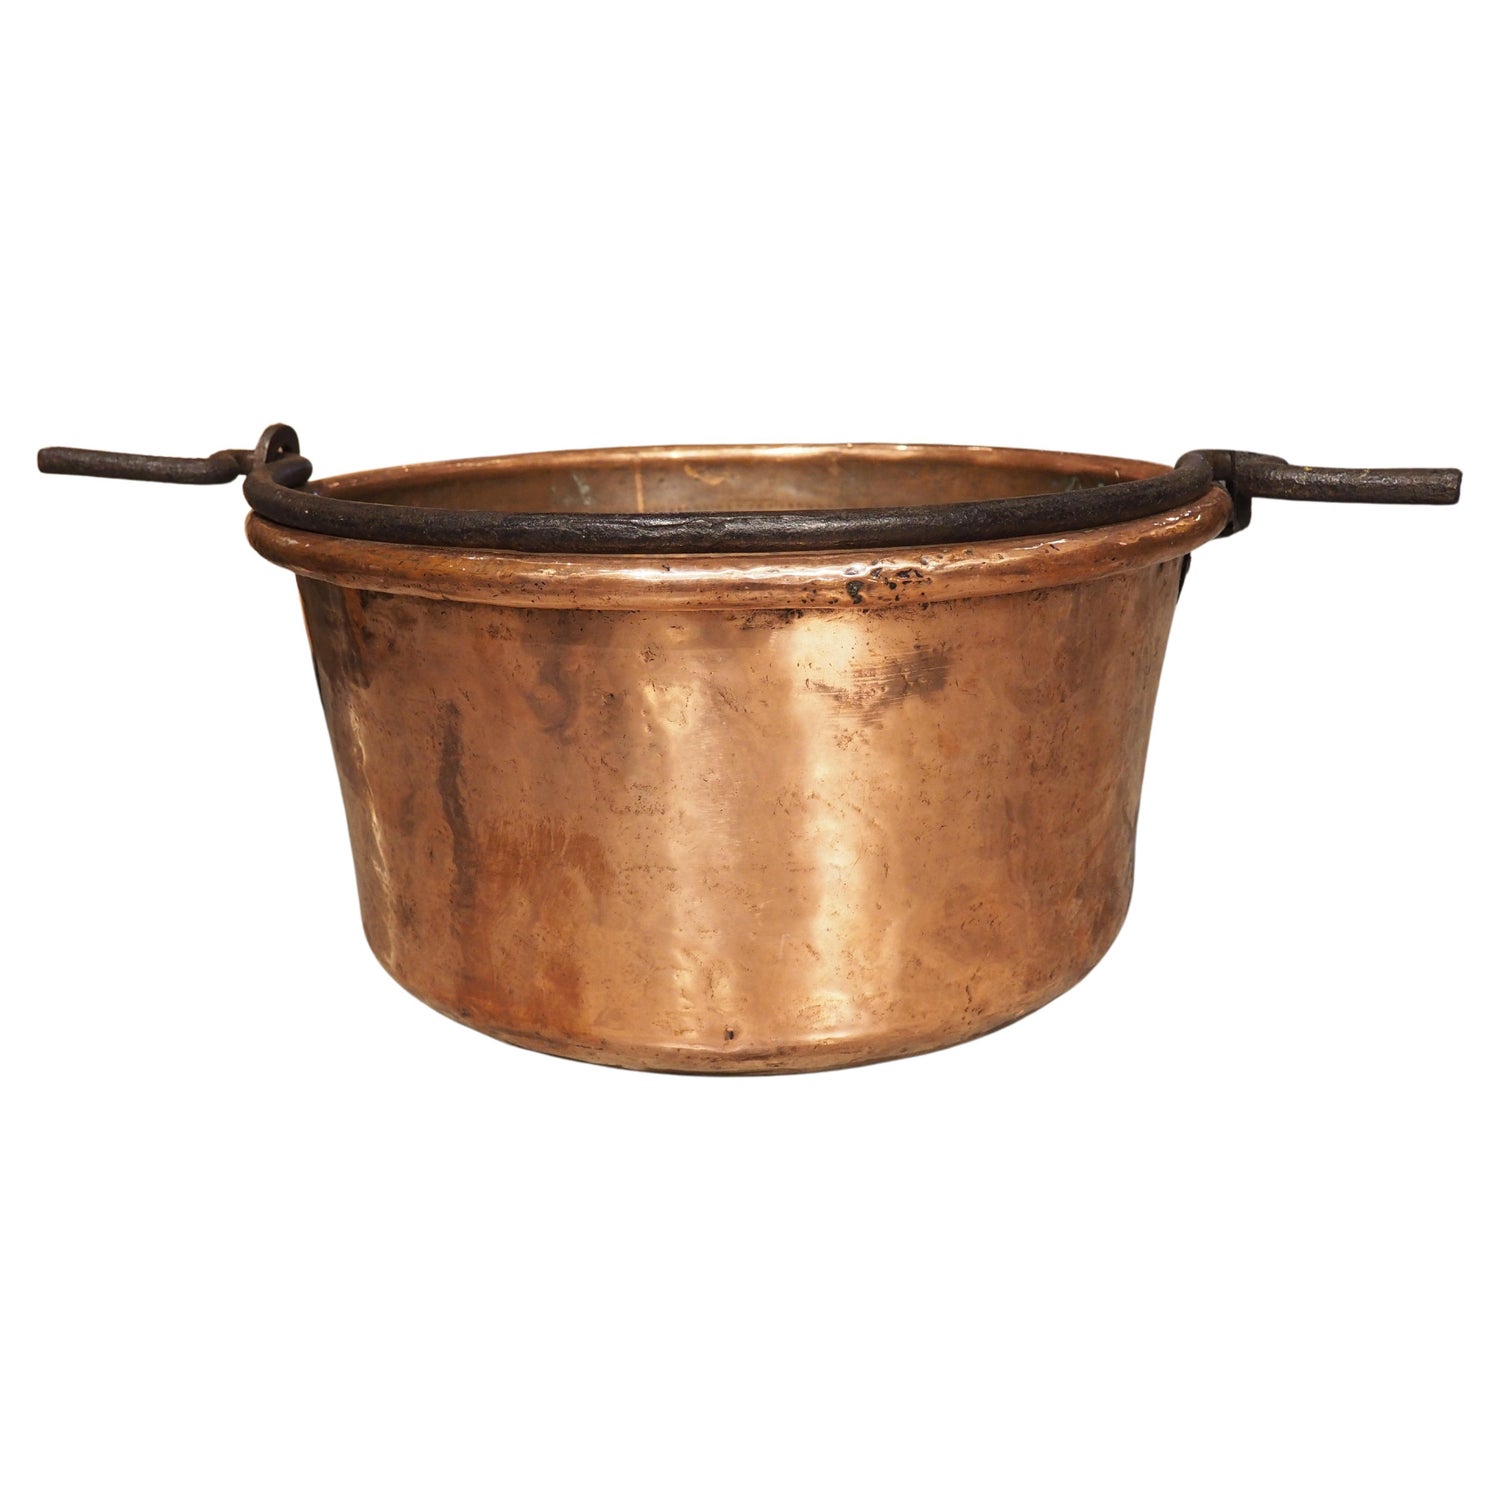 https://a.1stdibscdn.com/antique-polished-copper-chaudron-or-wine-cooler-wrought-iron-handle-circa-1850-for-sale/f_9063/f_327133221676064733712/f_32713322_1676064735047_bg_processed.jpg?width=1500